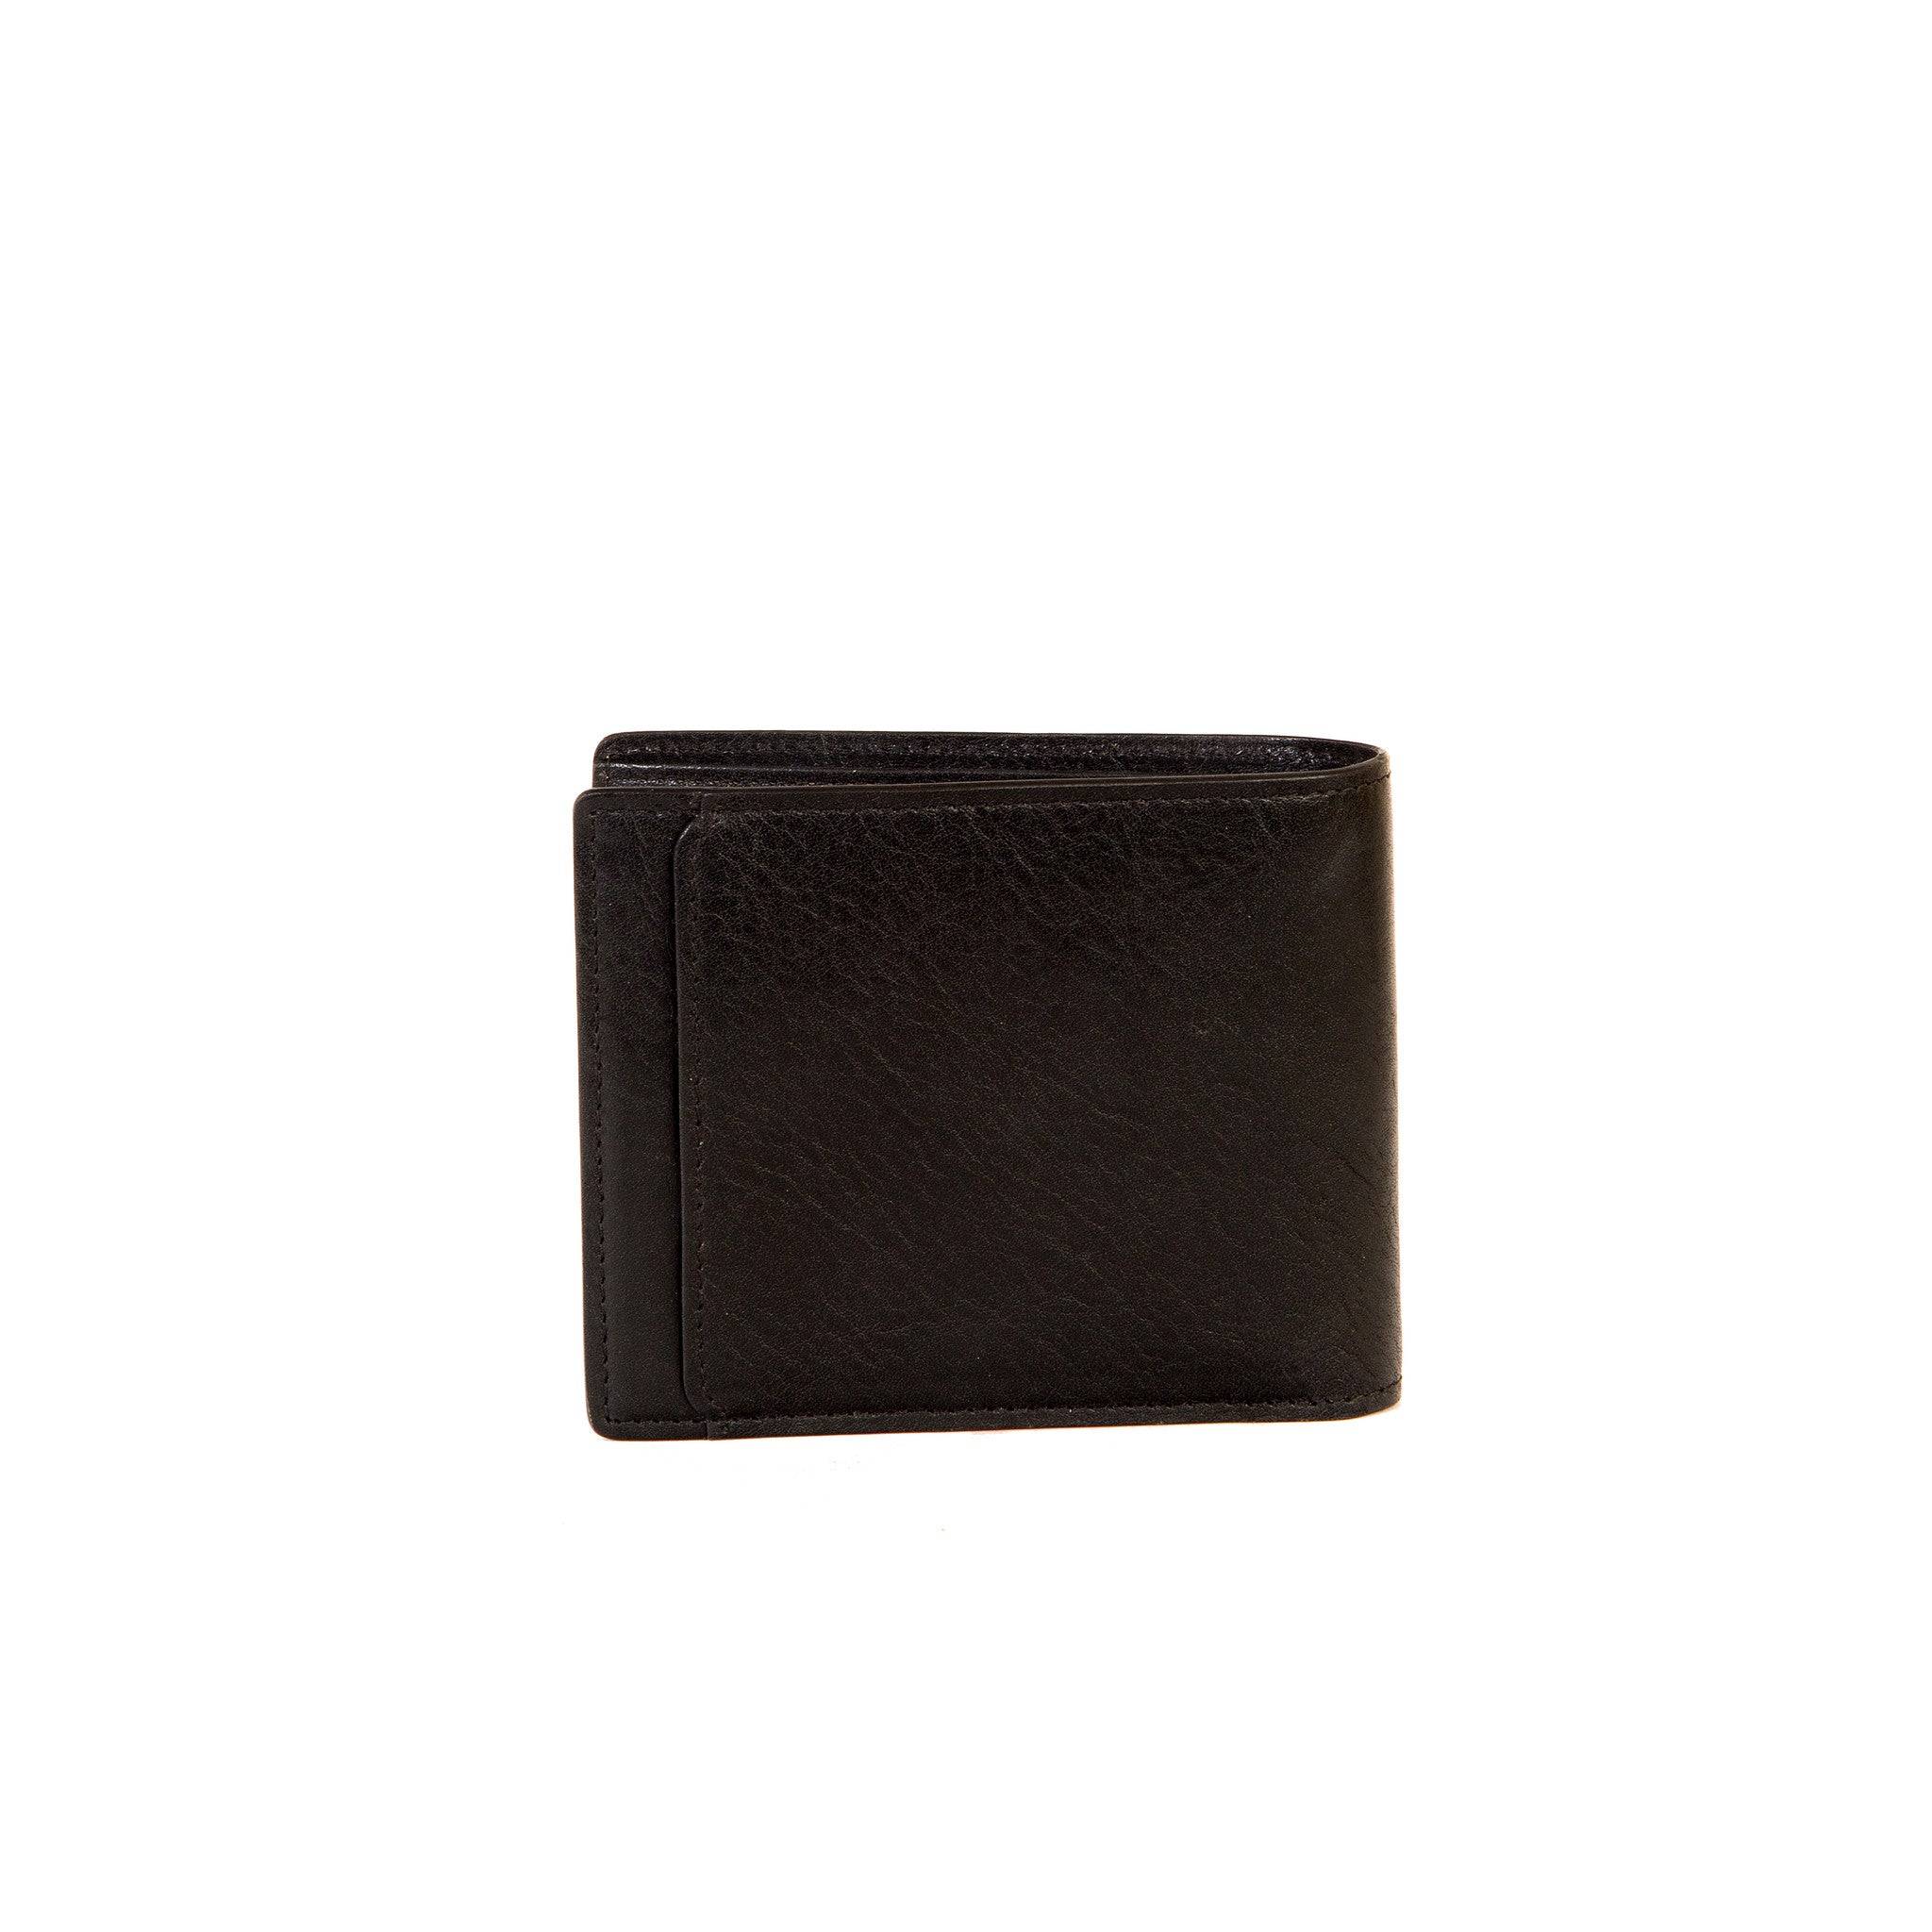 Becker Leather Billfold Wallet – Boconi Bags & Leather Goods